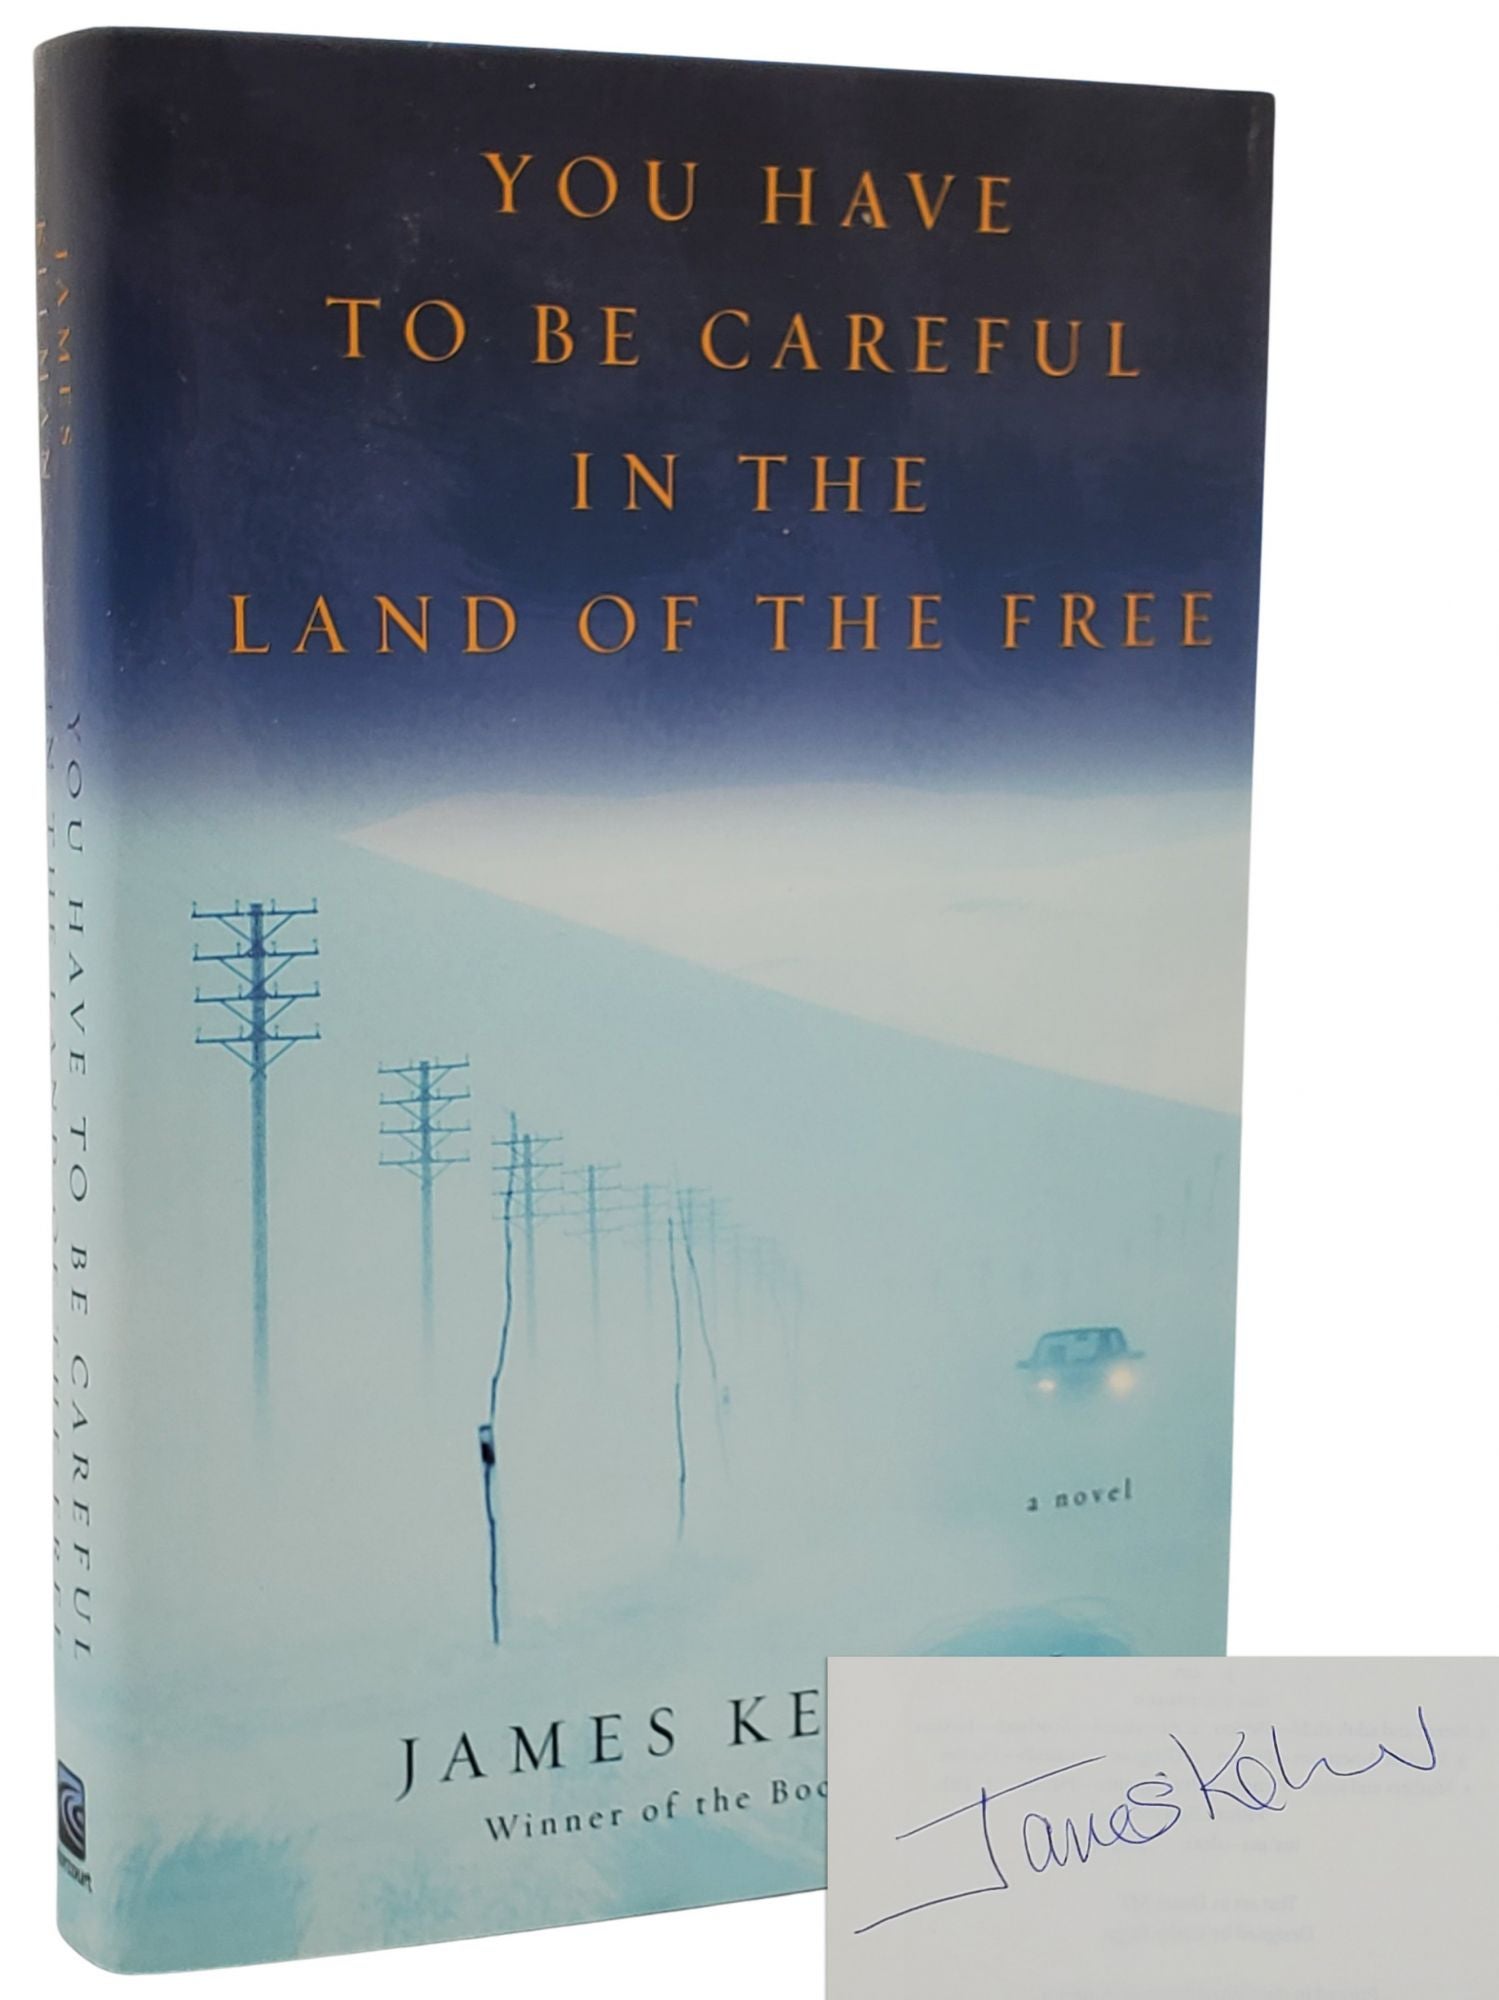 [Book #50276] YOU HAVE TO BE CAREFUL IN THE LAND OF THE FREE. James Kelman.